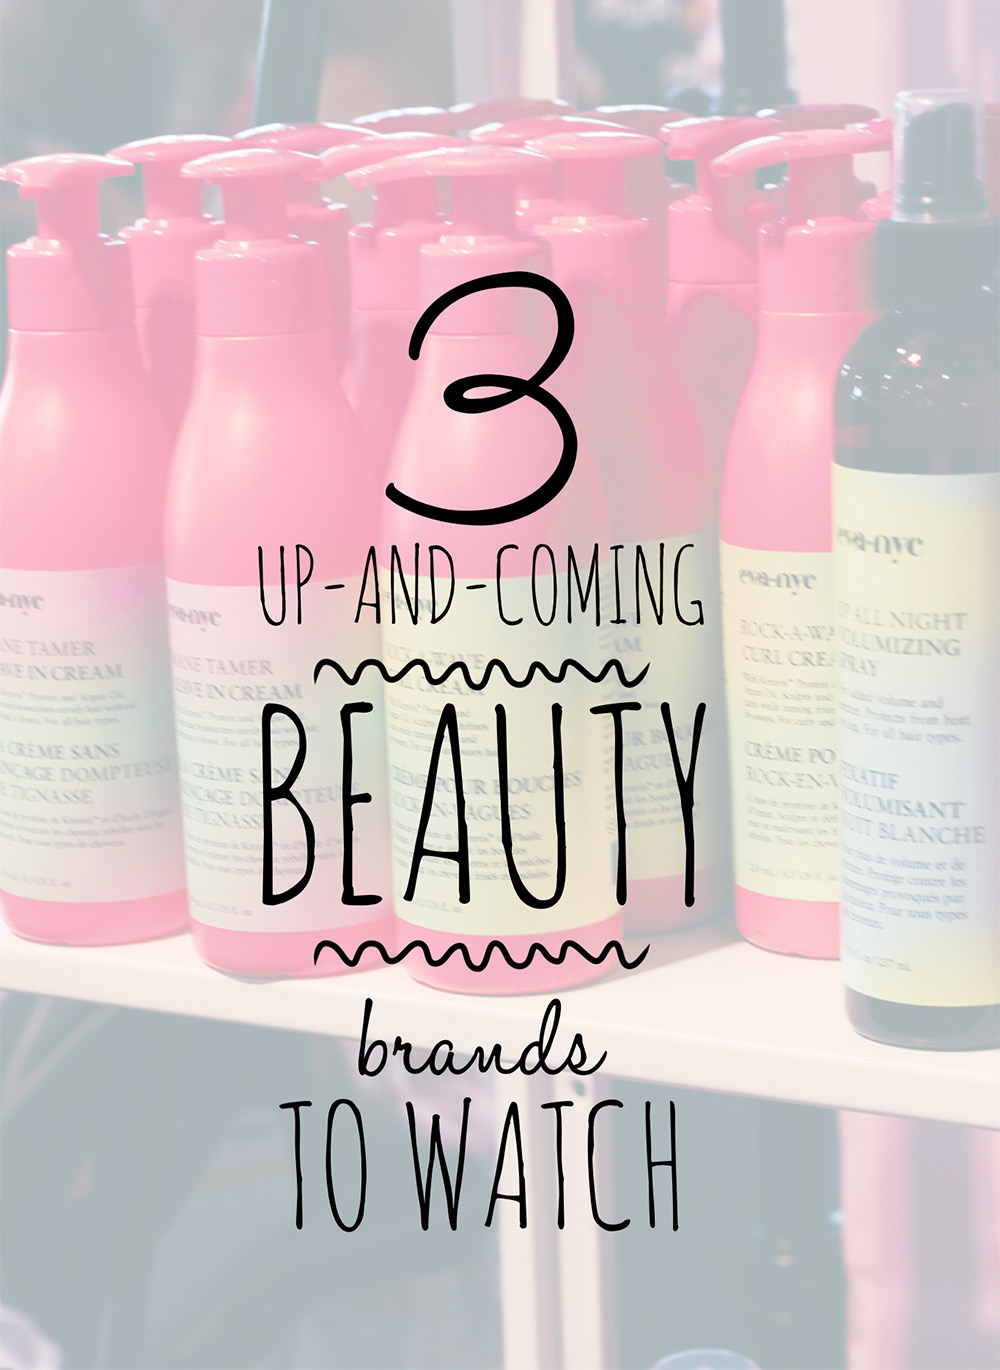 3 beauty brands to watch